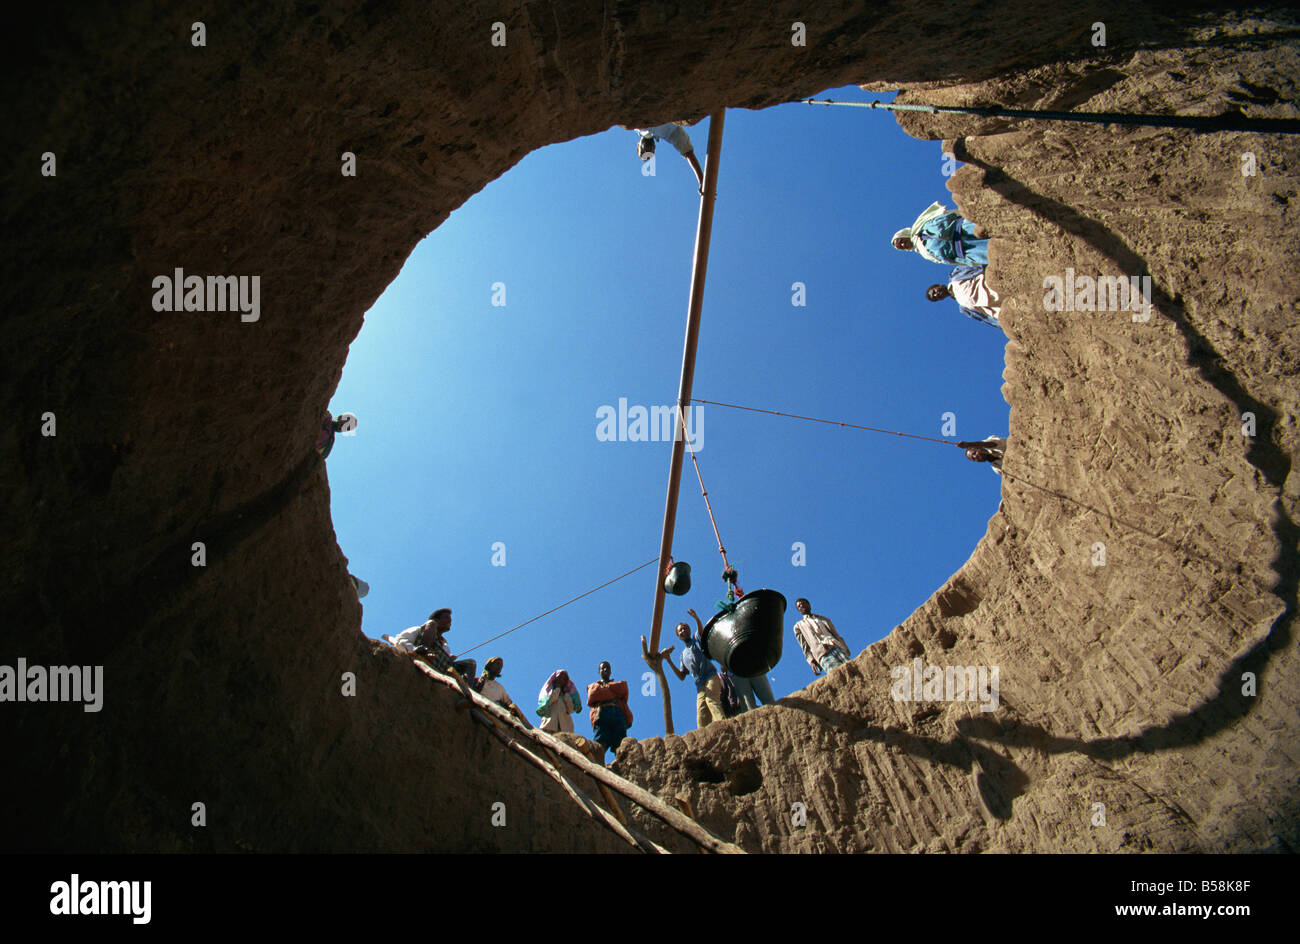 View up out of a well, Teferi Ber camp, Ethiopia, Africa Stock Photo